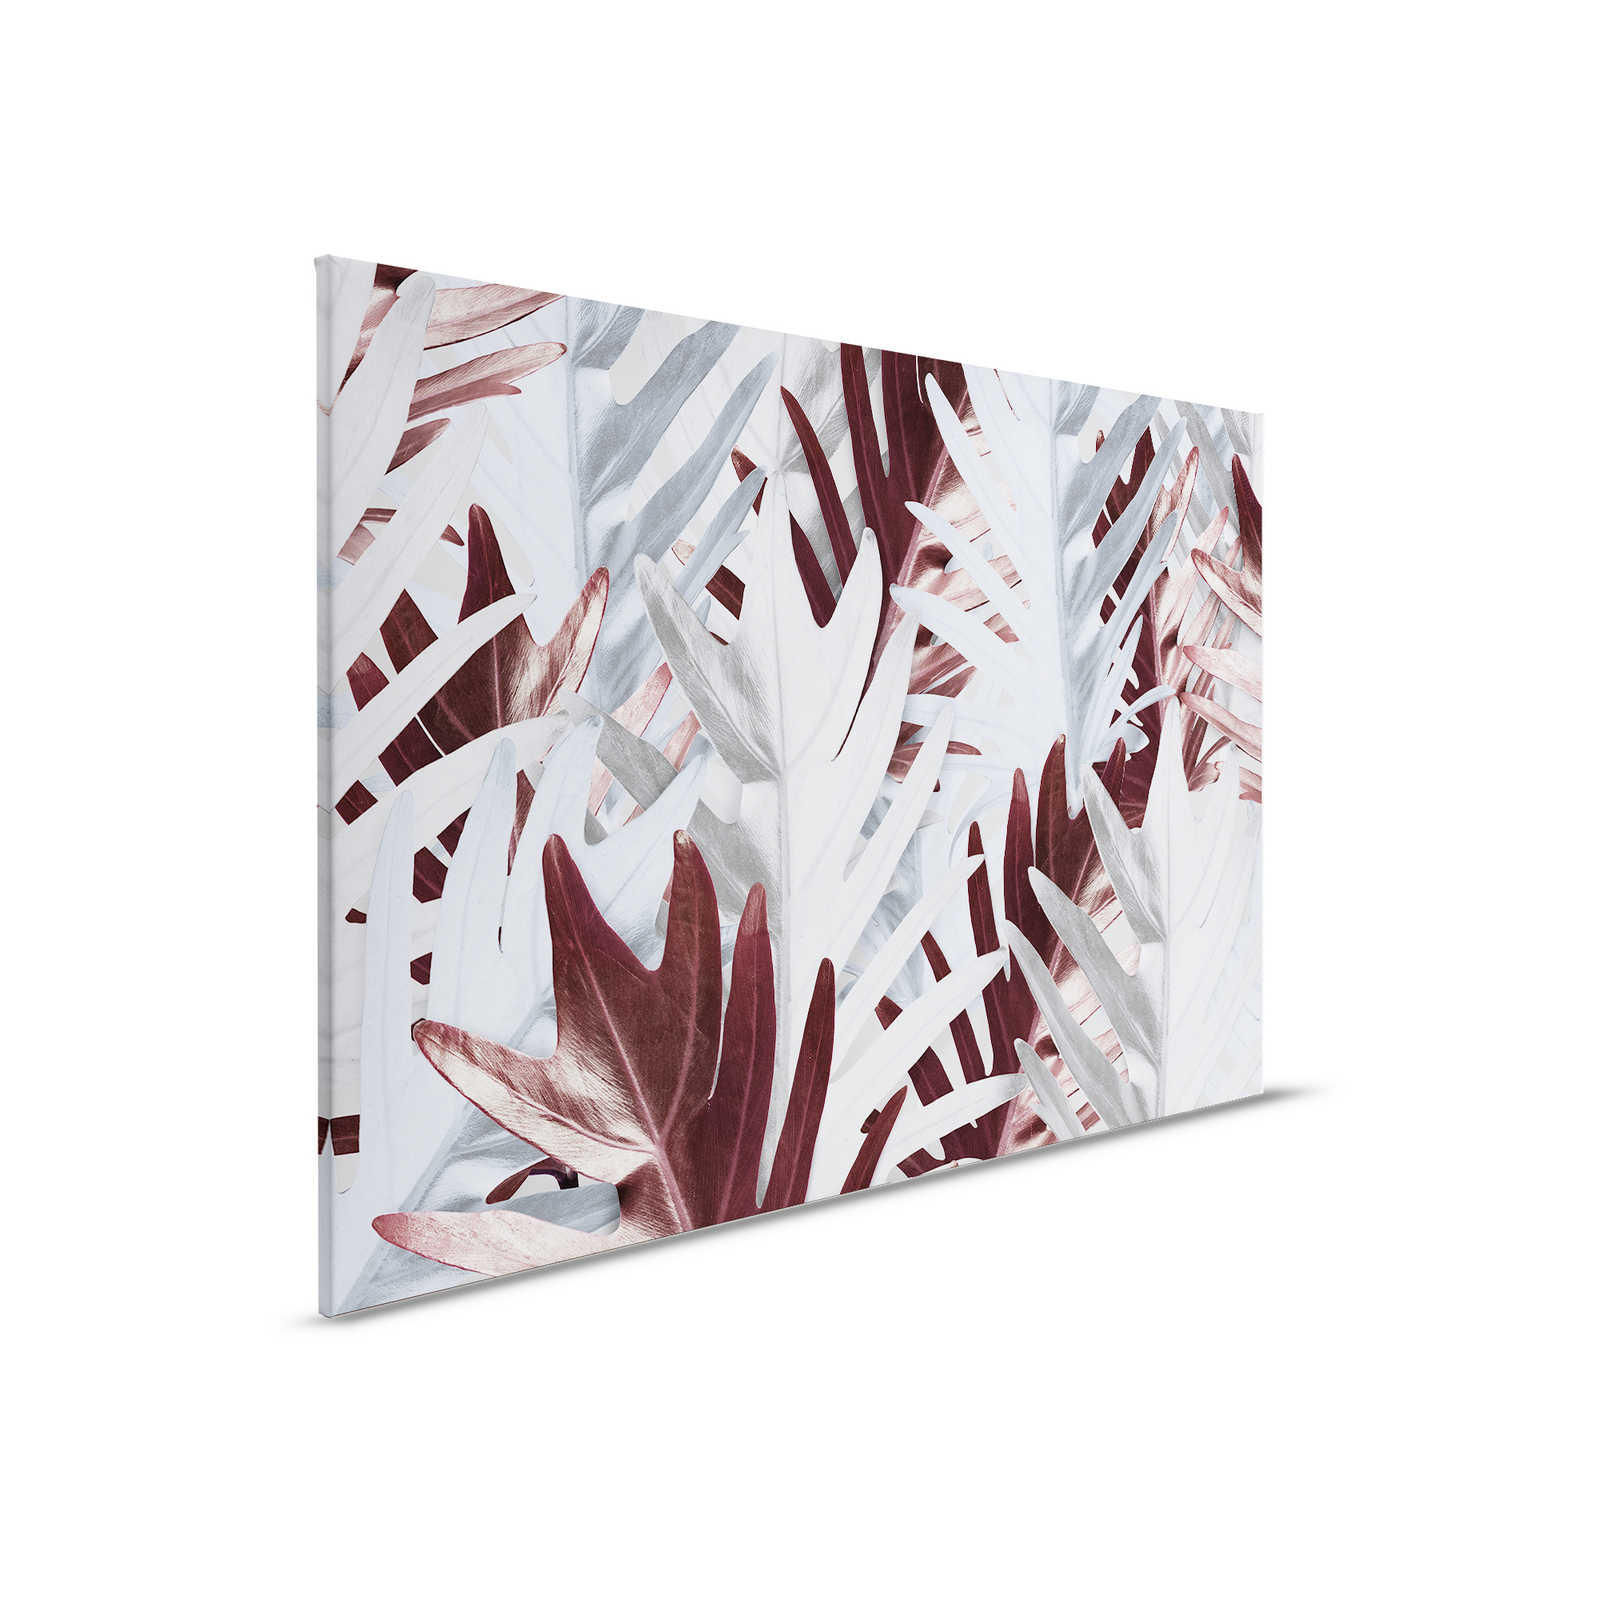         Canvas painting with jungle leaves in soft shades - 0.90 m x 0.60 m
    